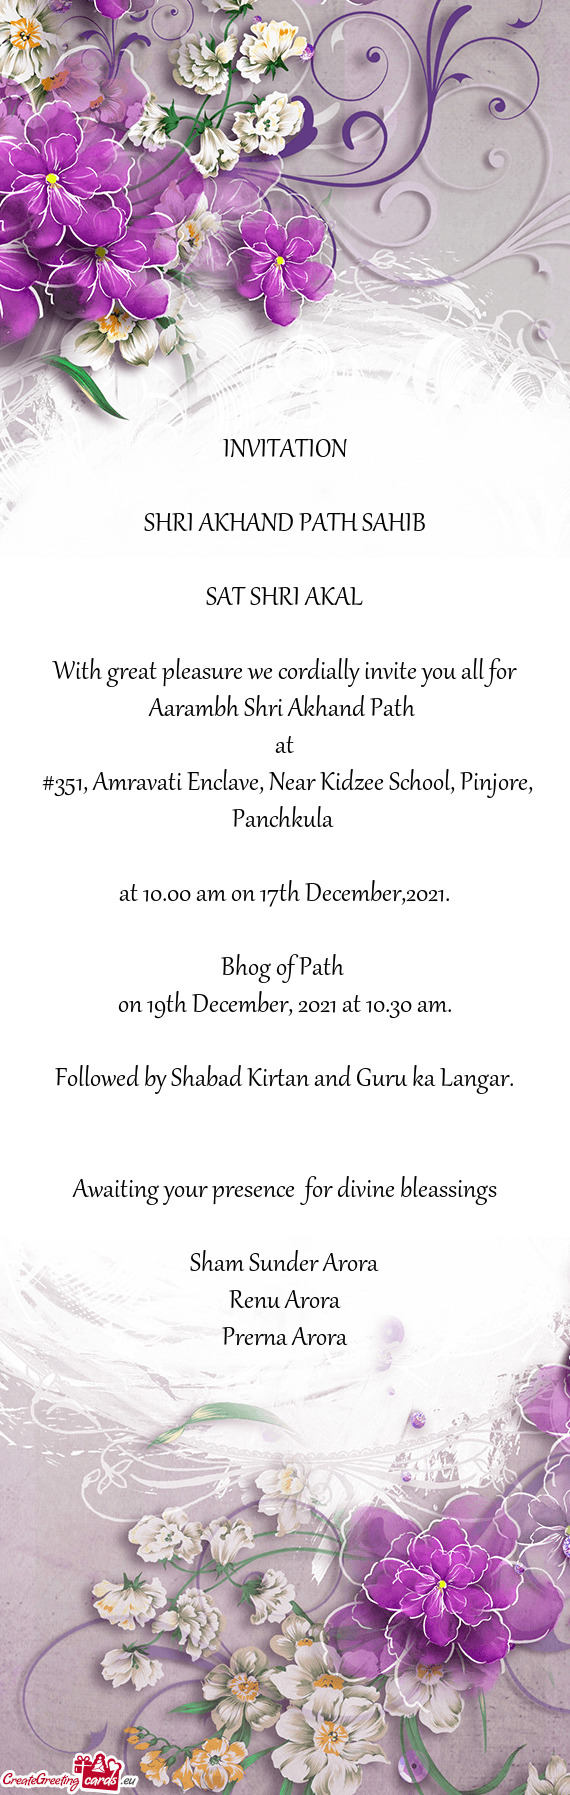 With great pleasure we cordially invite you all for Aarambh Shri Akhand Path